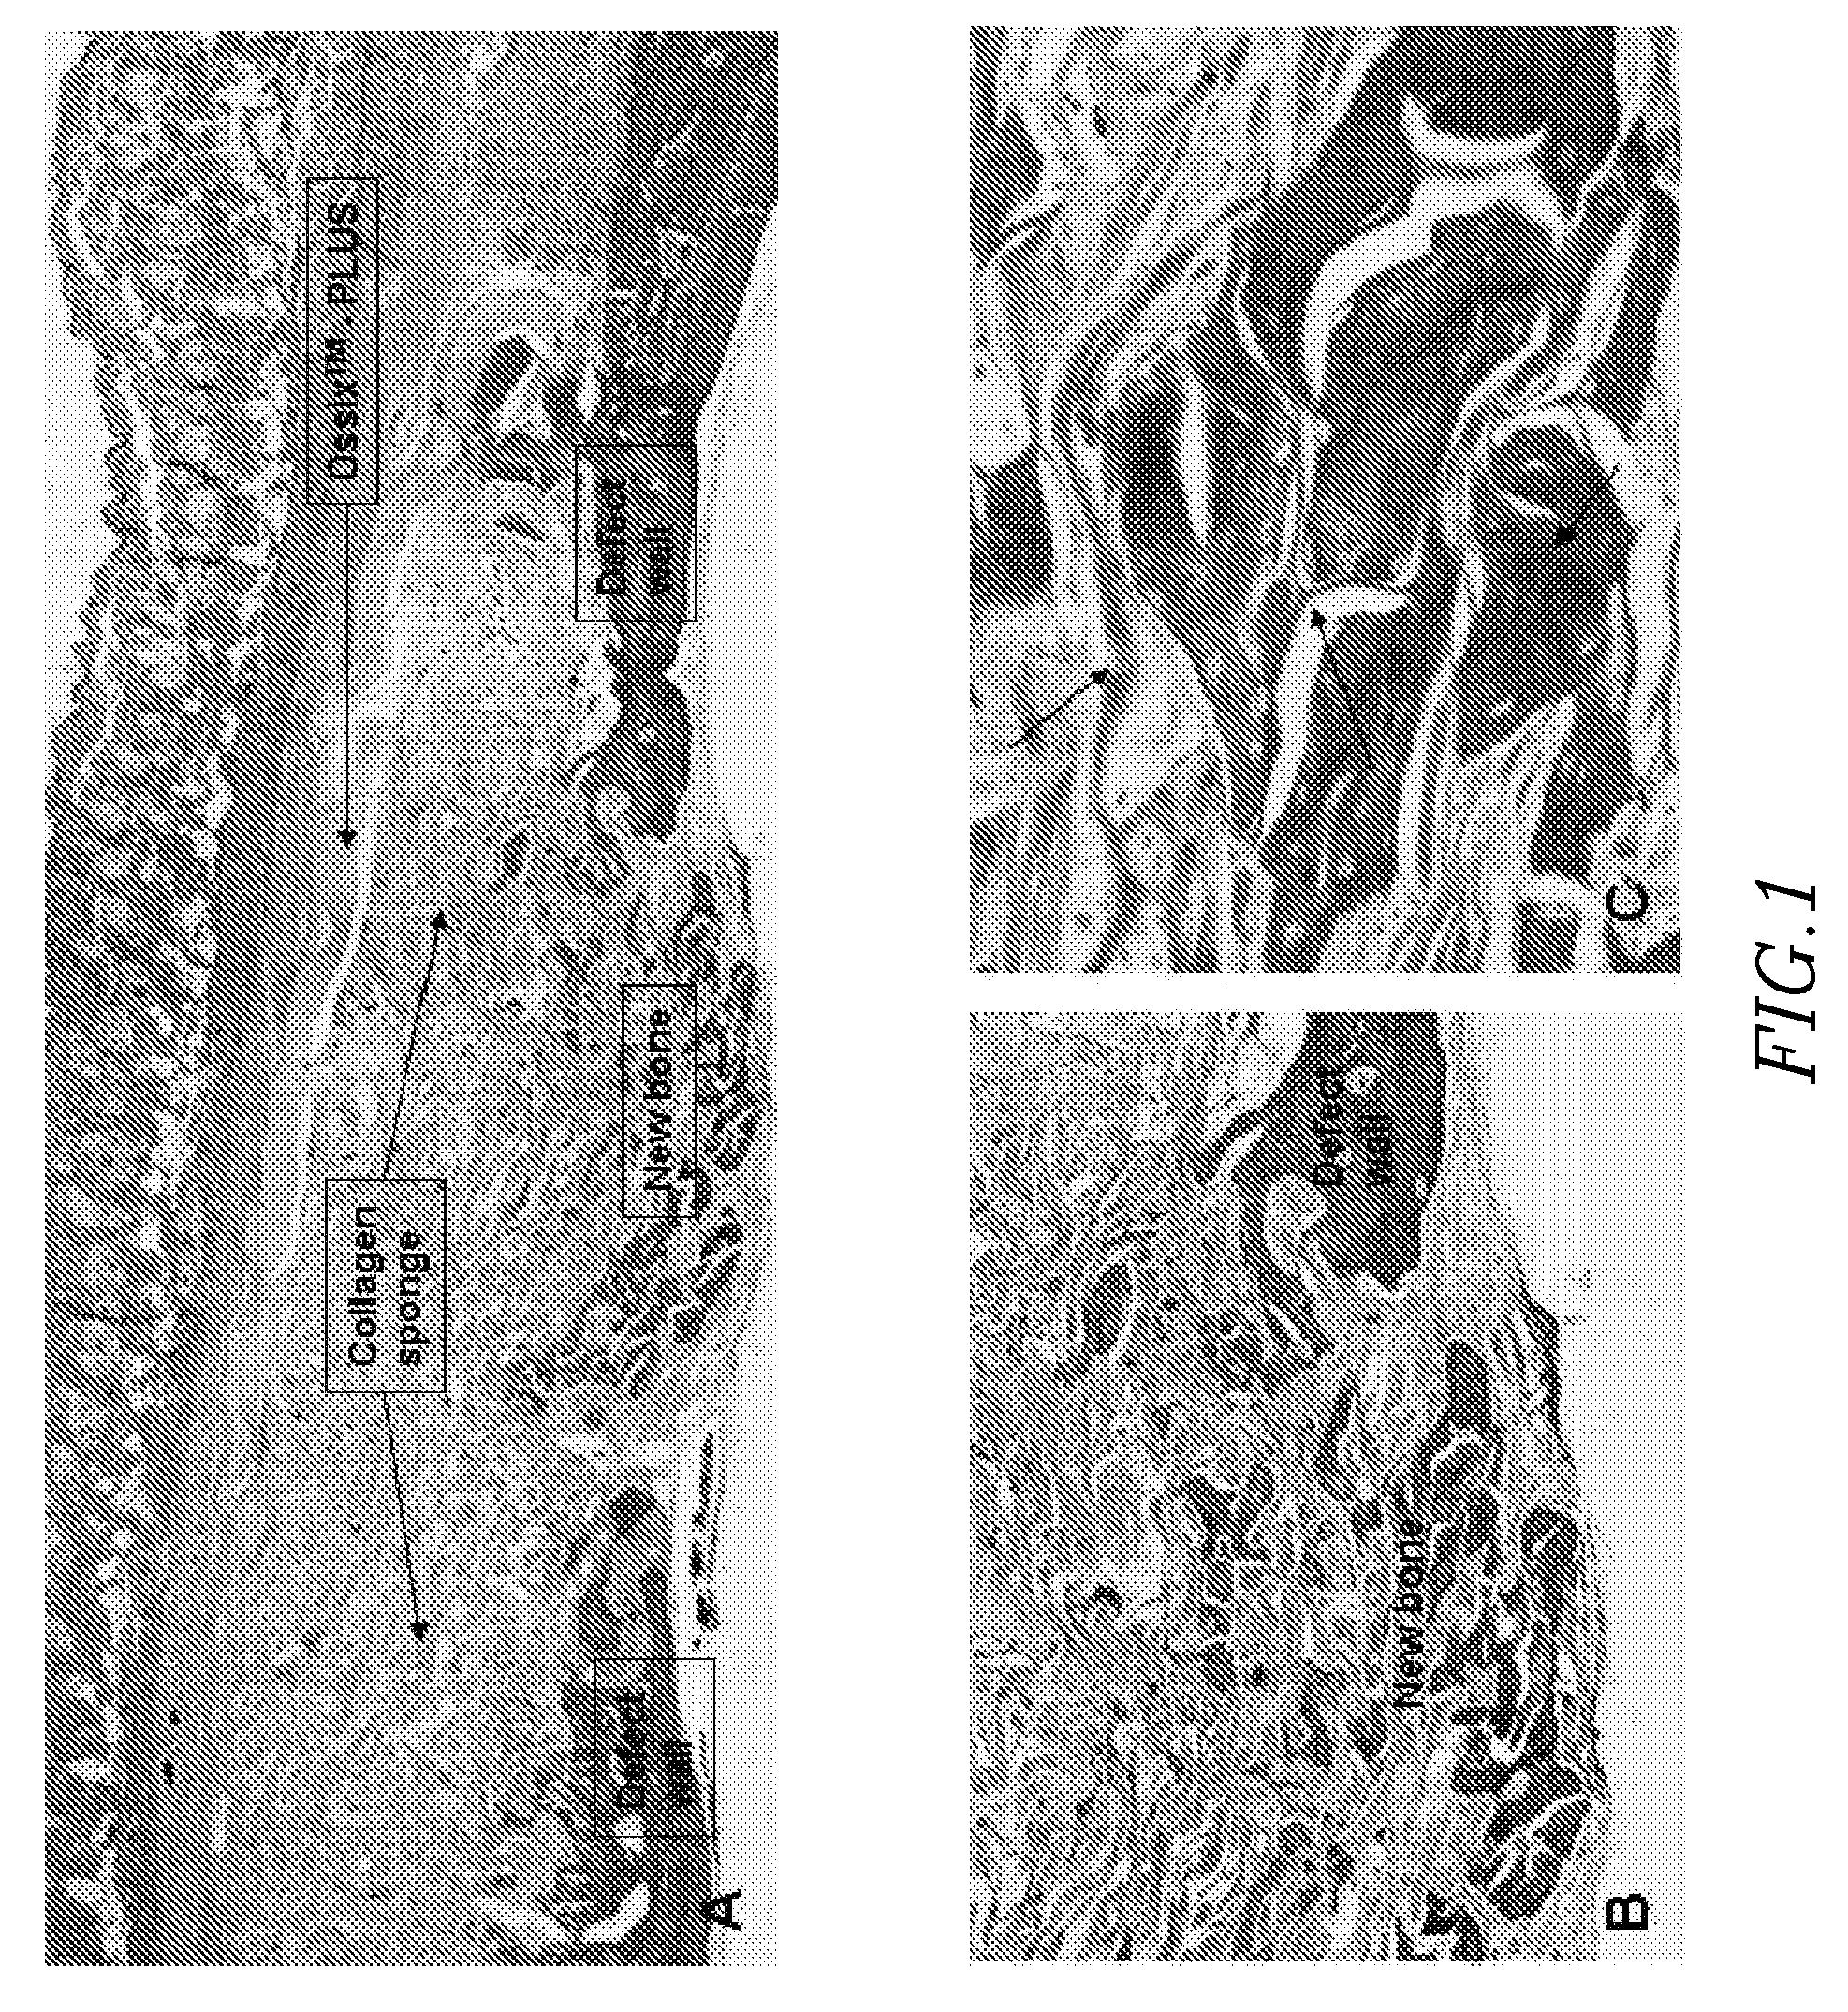 Composite implants for promoting bone regeneration and augmentation and methods for their preparation and use